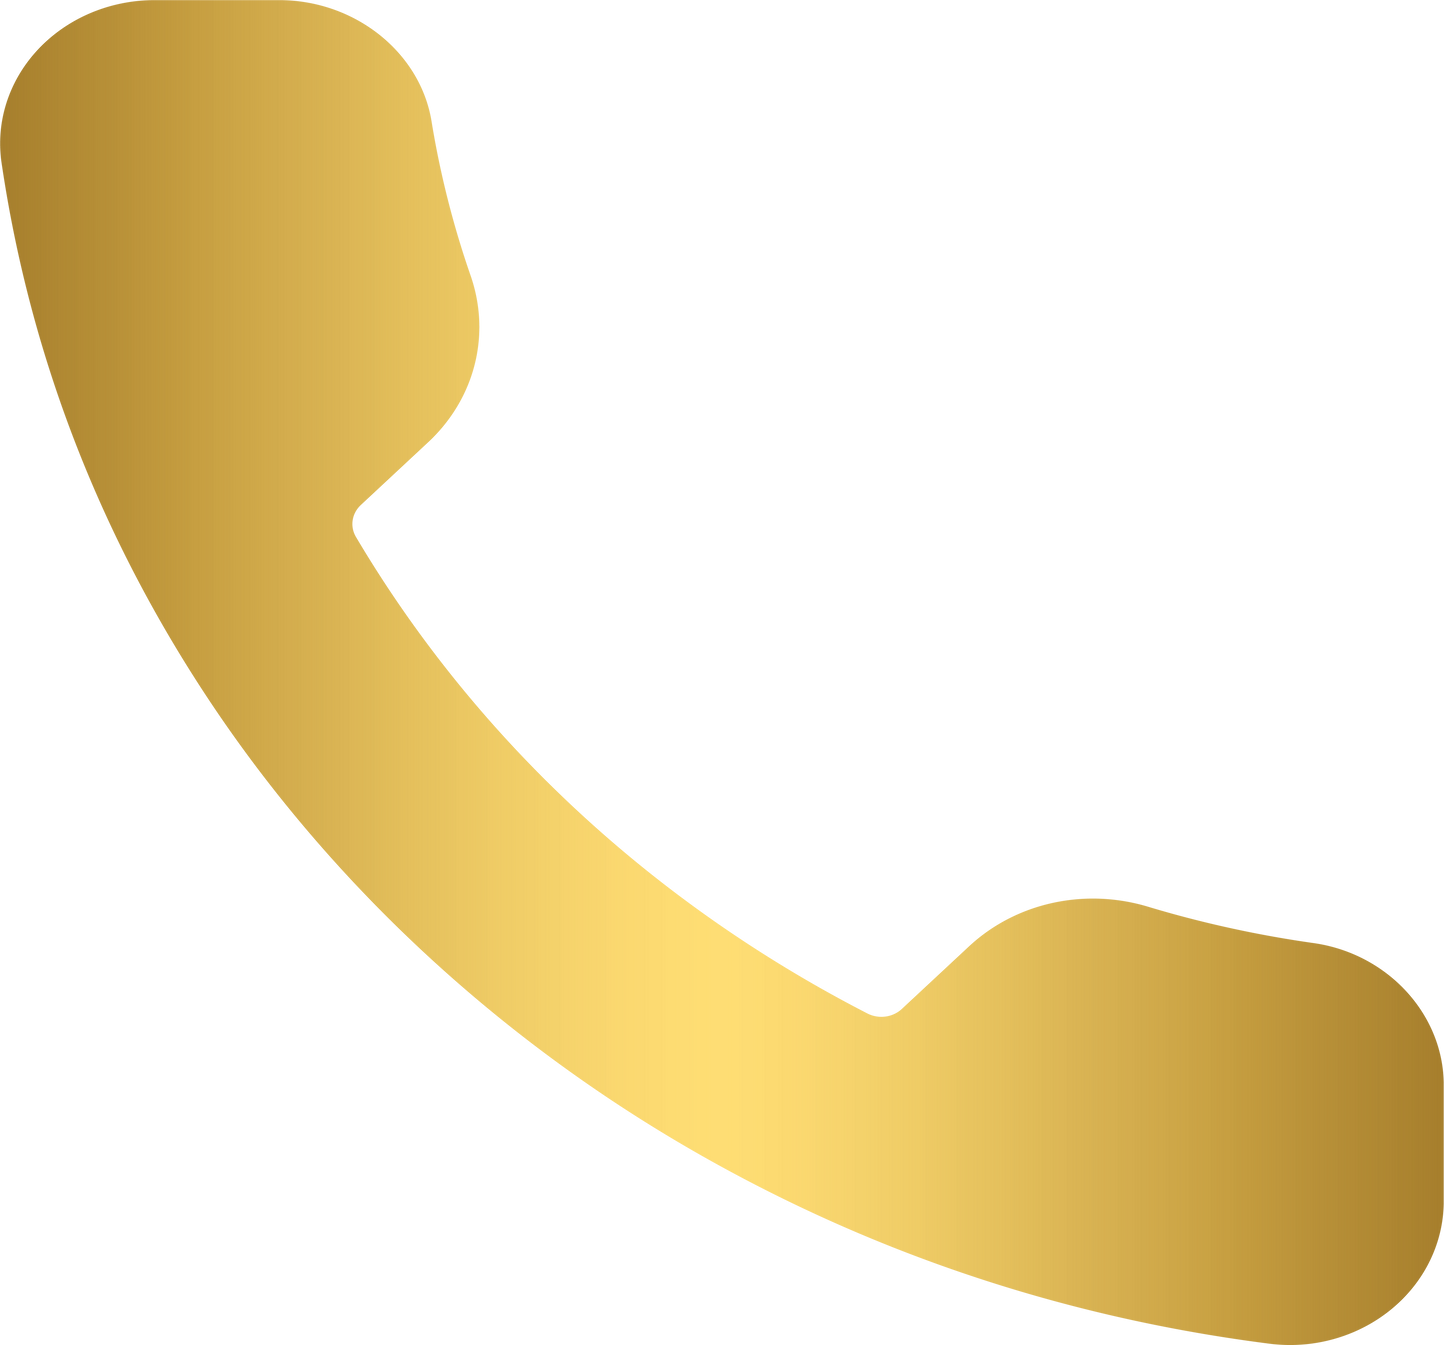 Gold phone call icon